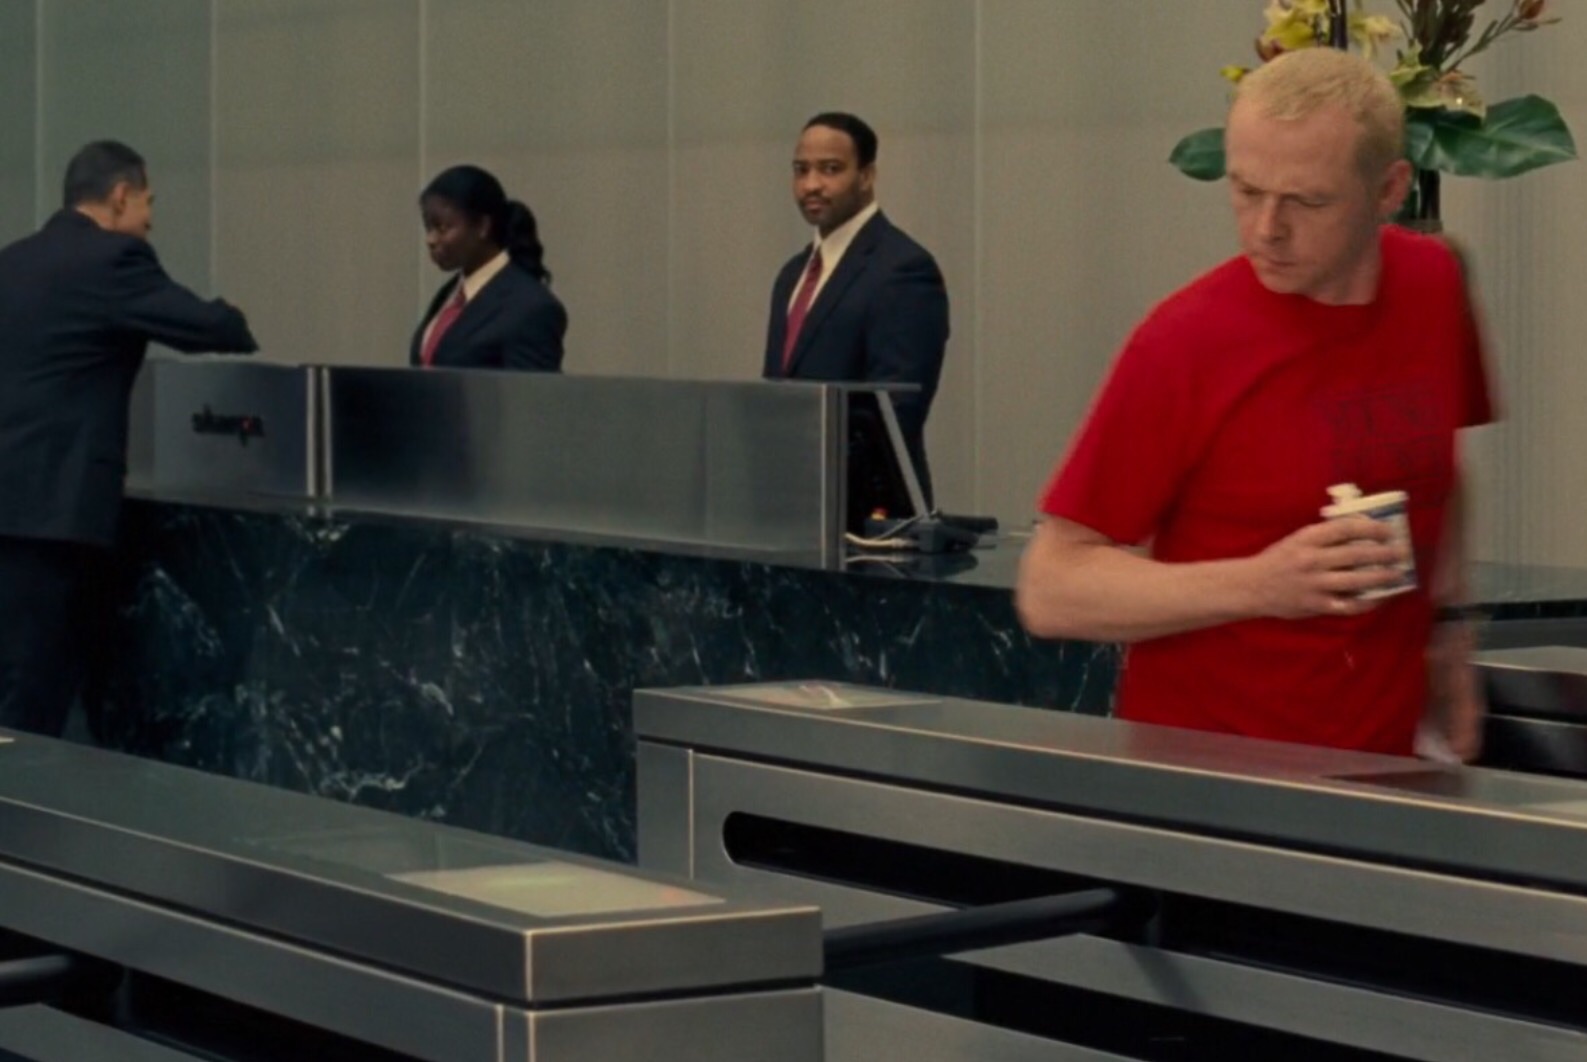 'That guy in red is an @sshole' -How To Lose Friends and Alienate People film.